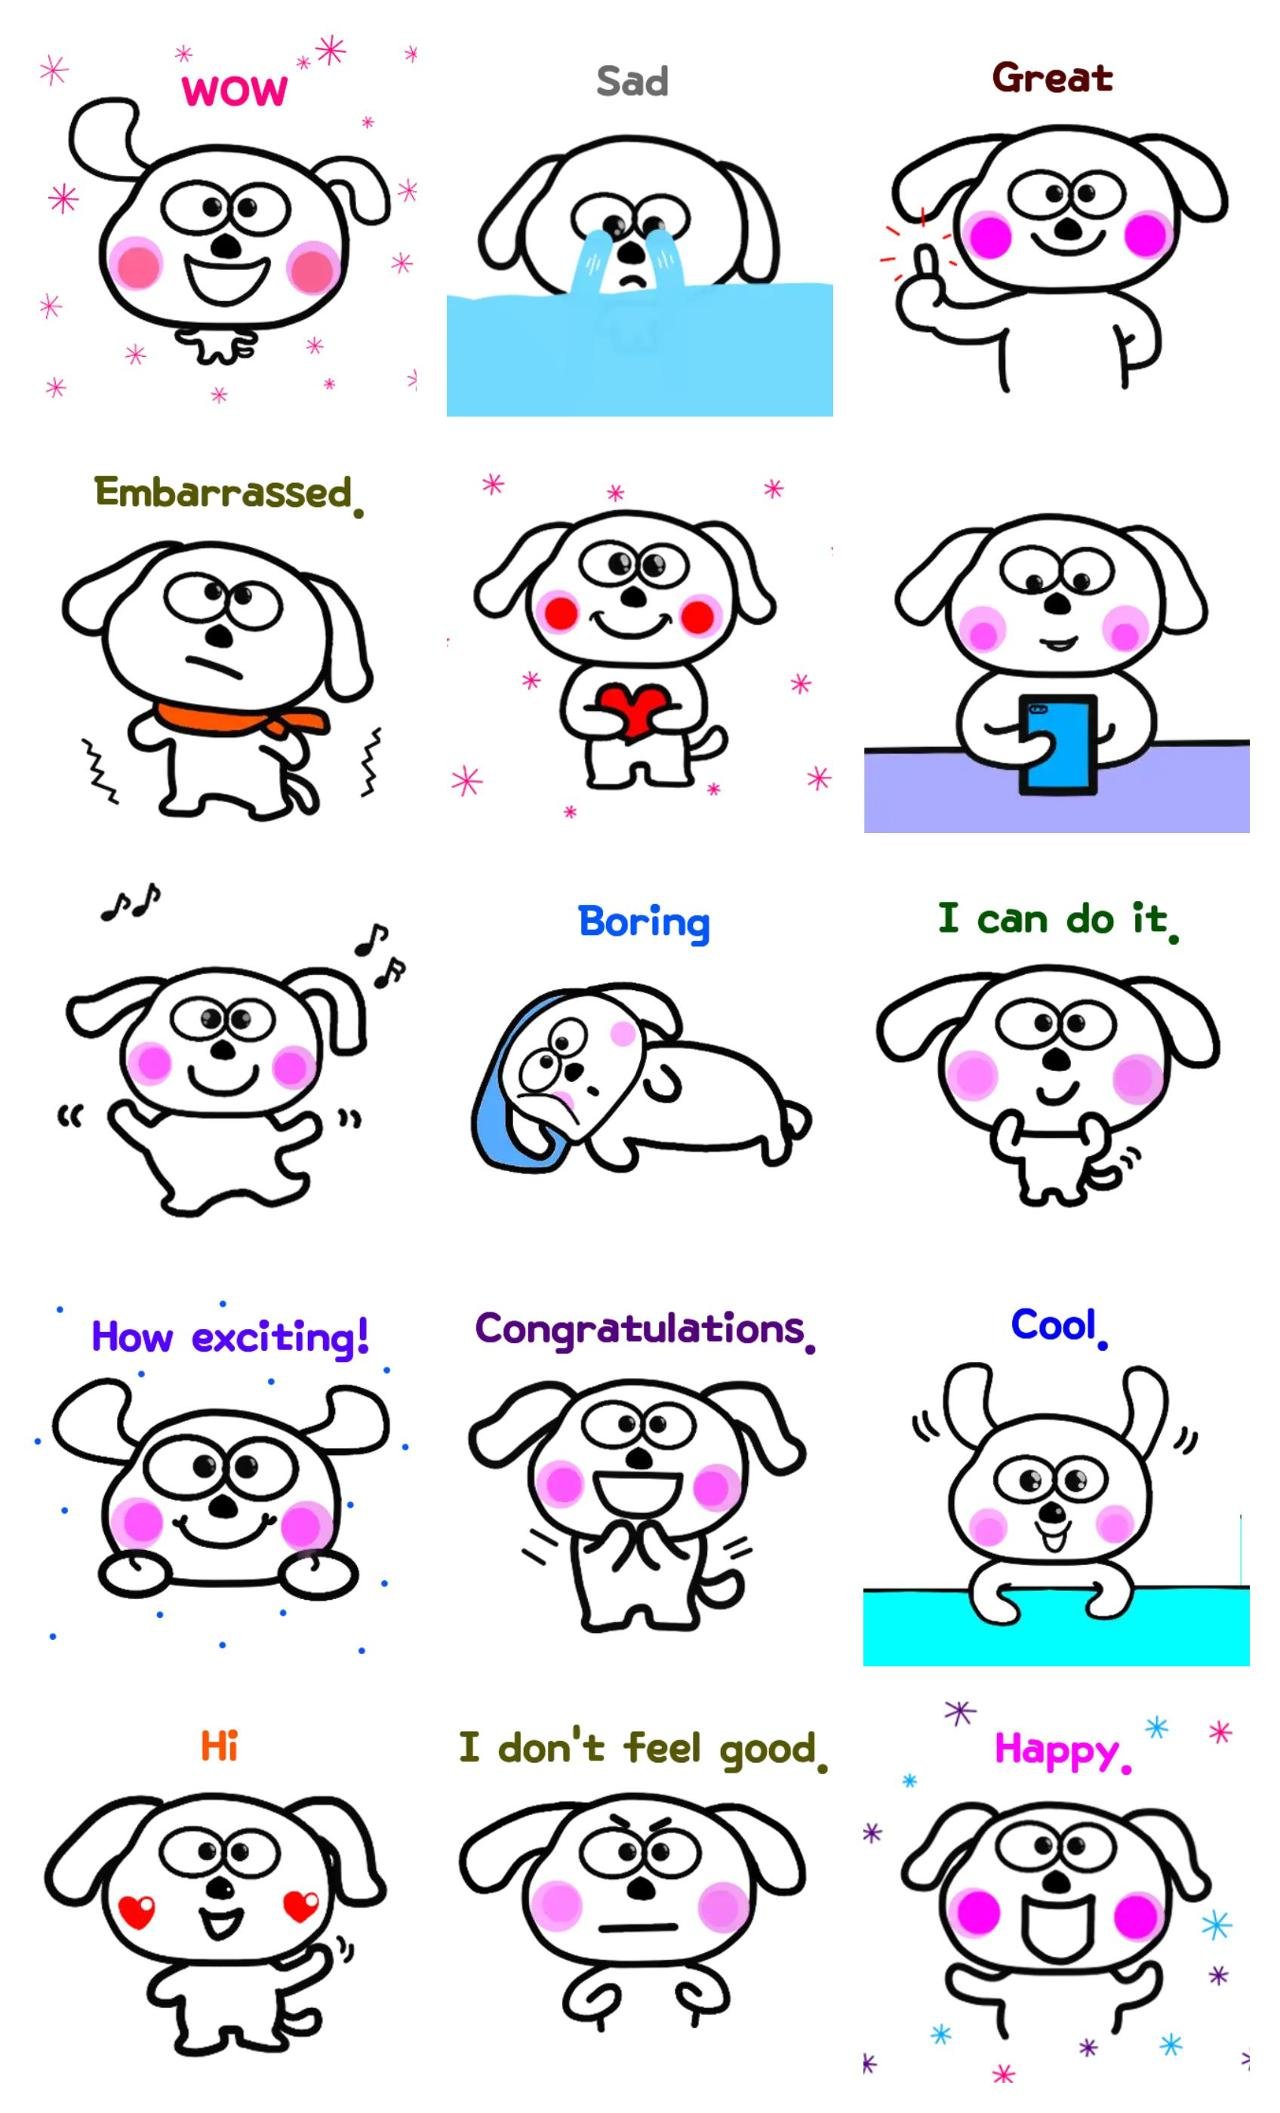 Enjoy Animals,Etc. sticker pack for Whatsapp, Telegram, Signal, and others chatting and message apps